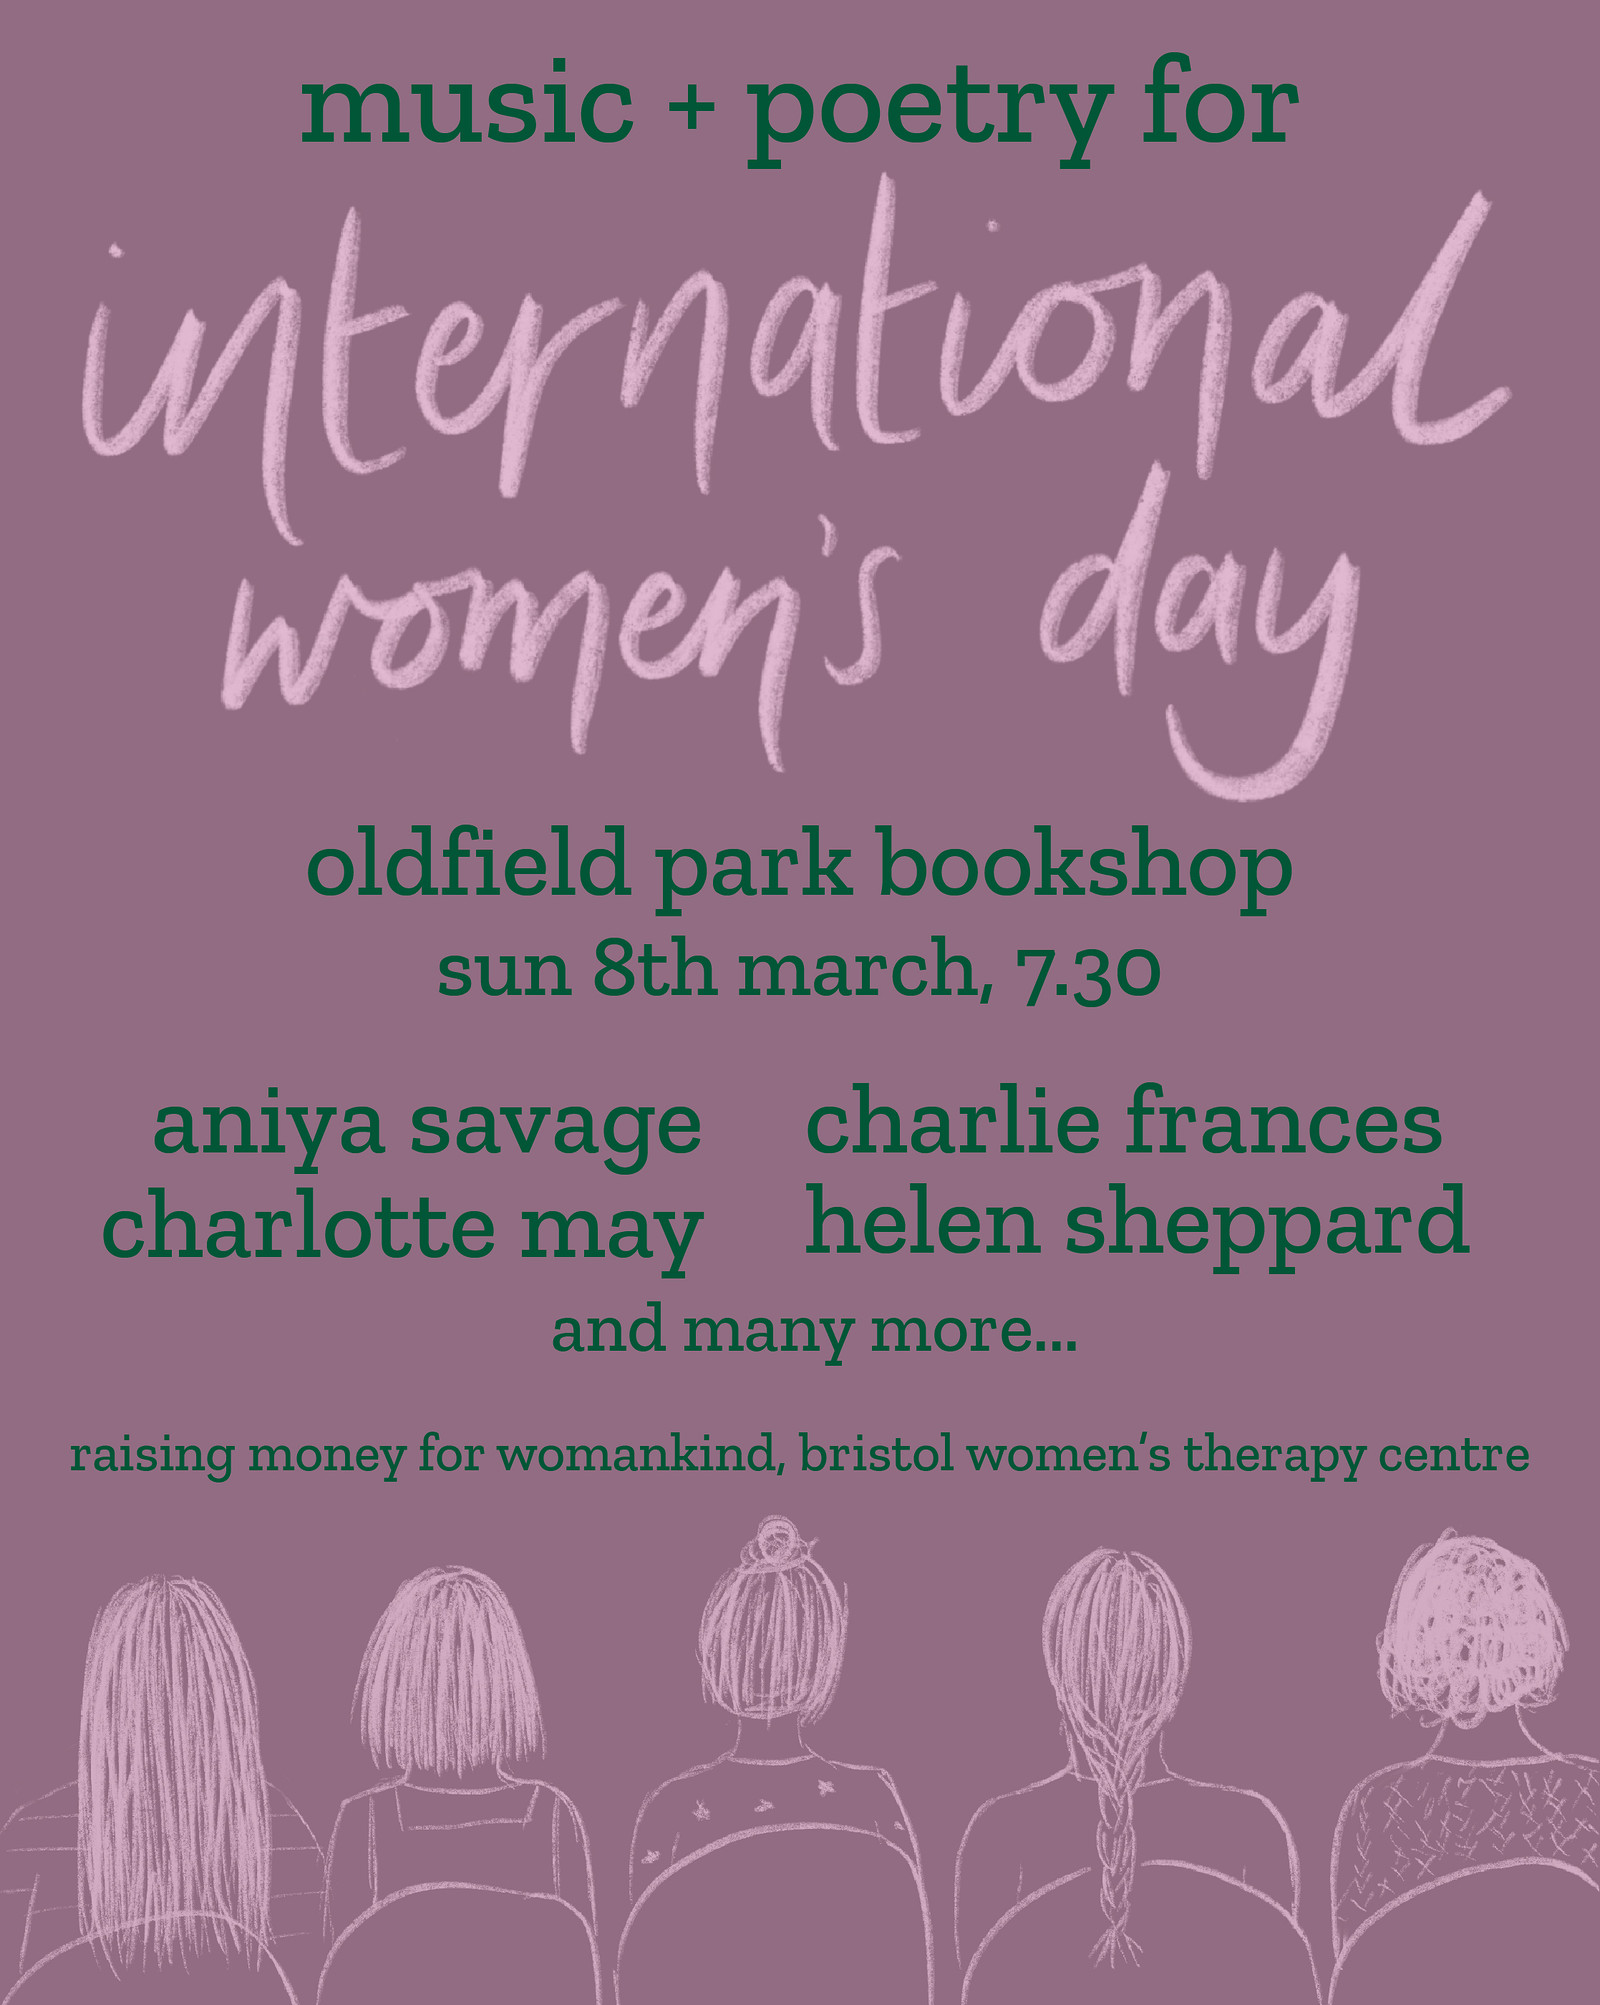 Music + Poetry for International Women's Day at Oldfield Park Bookshop